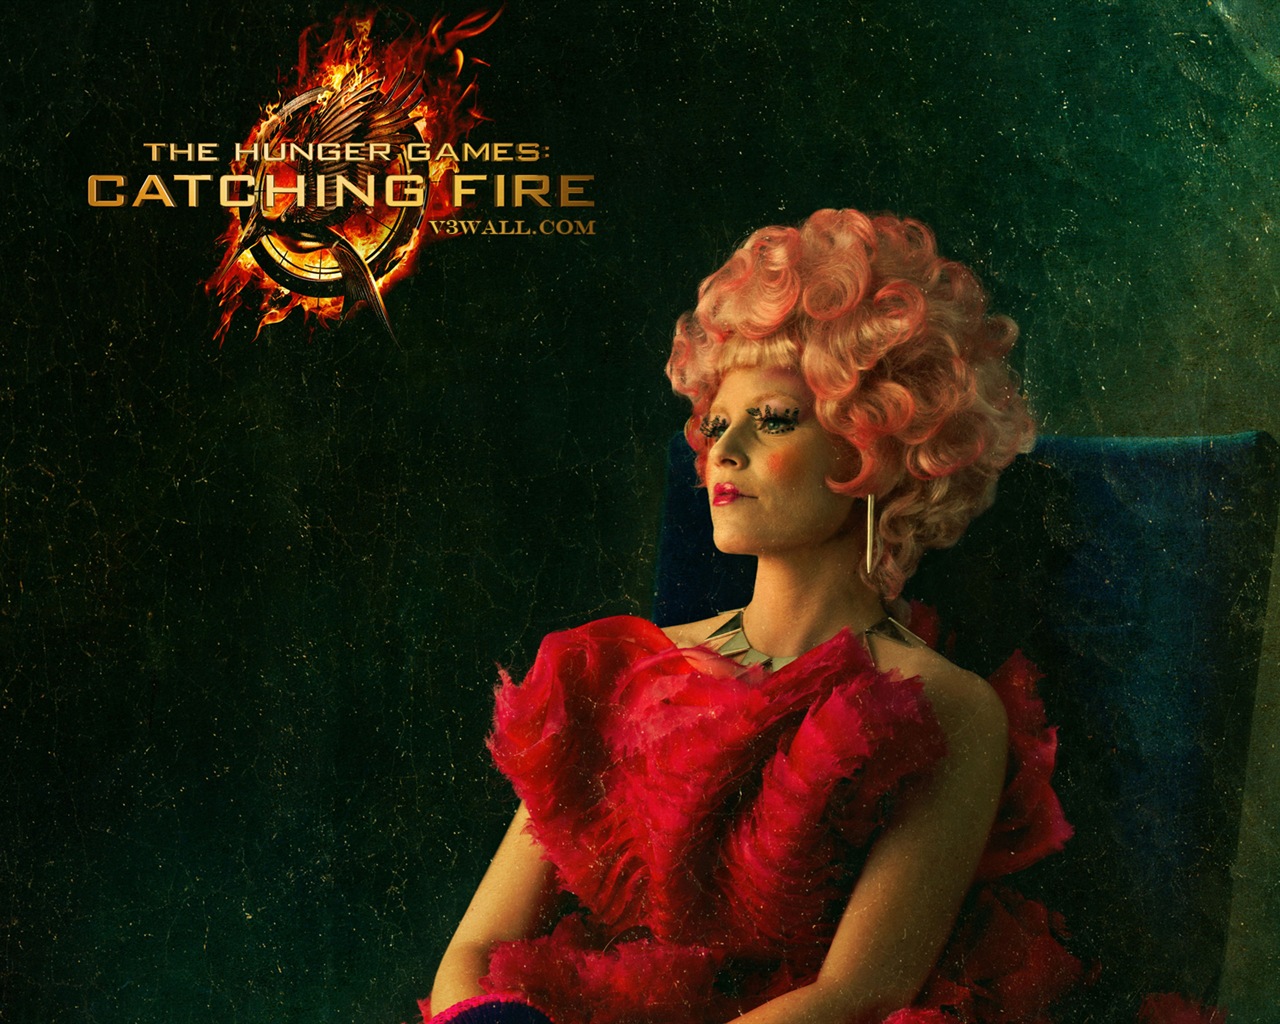 The Hunger Games: Catching Fire HD tapety #19 - 1280x1024